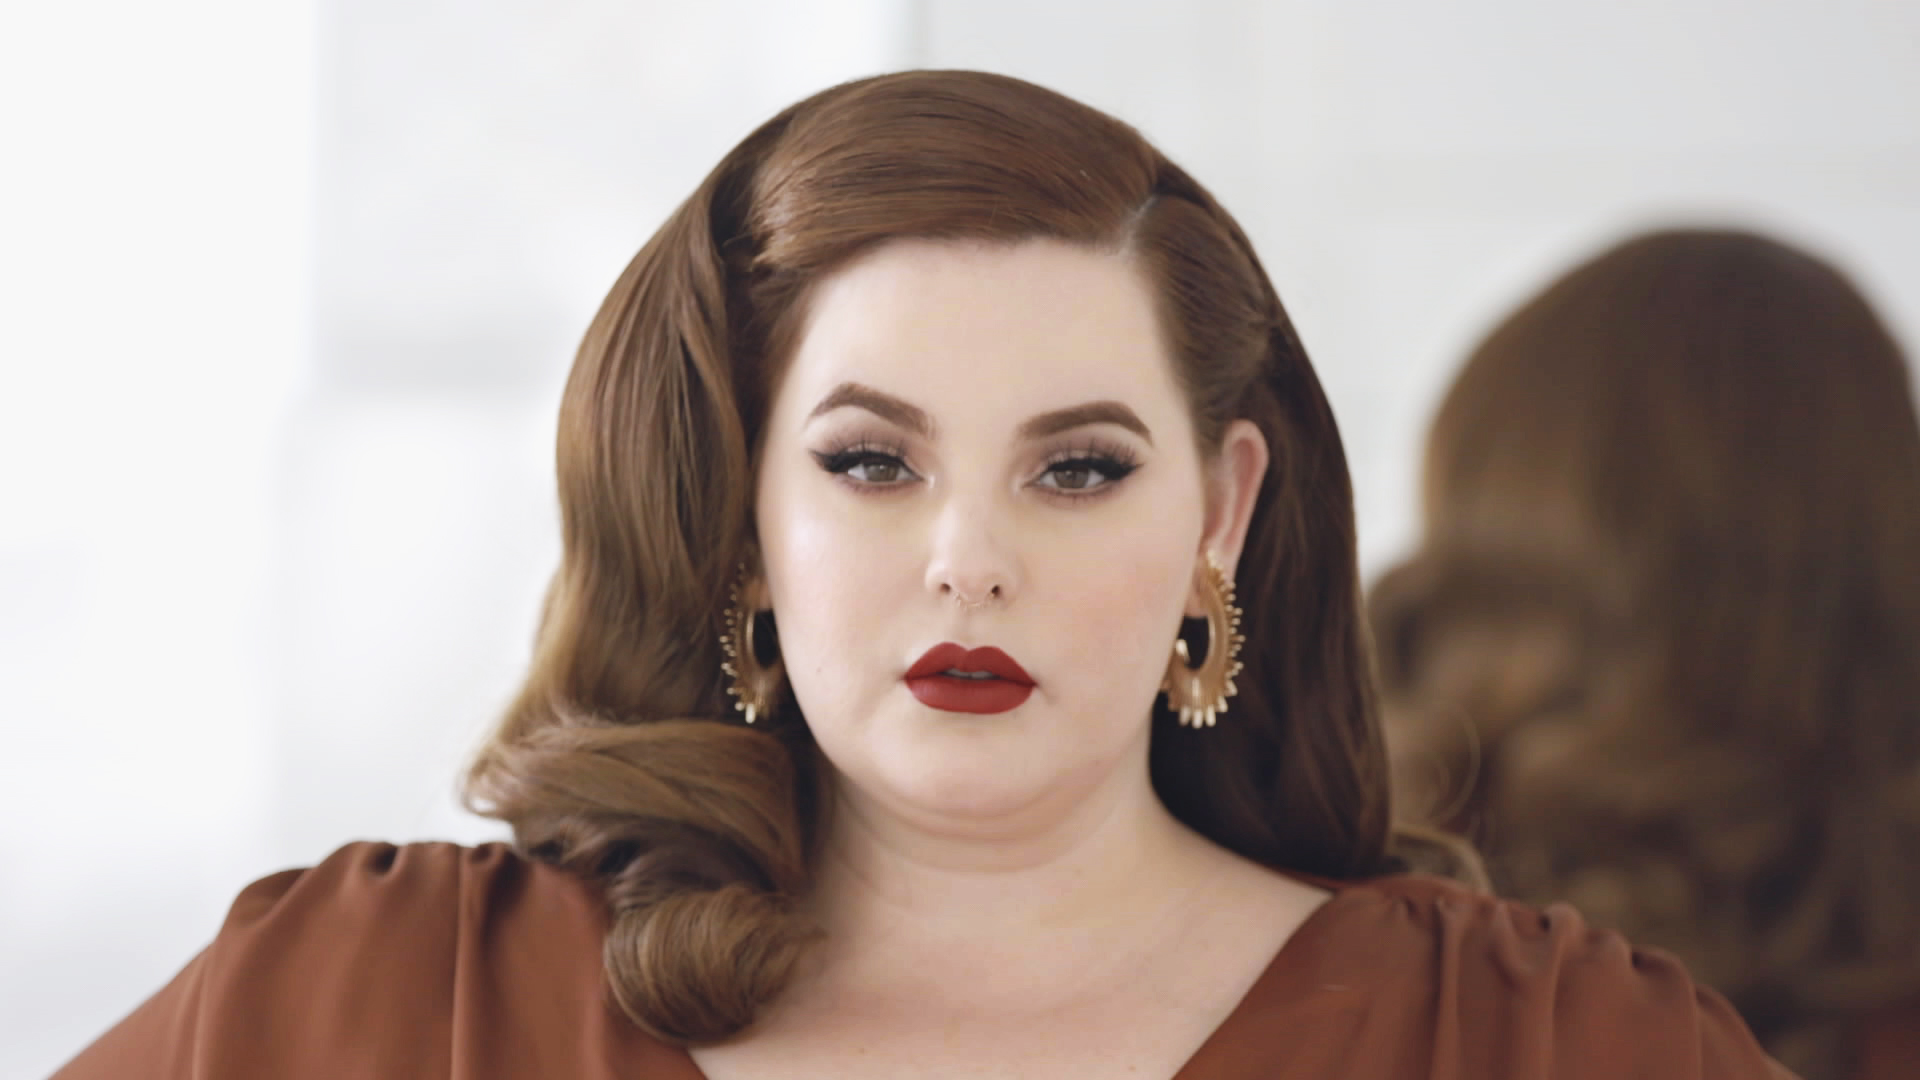 Tess Holiday Porn - Tess Holliday on Challenging Body-Shamers